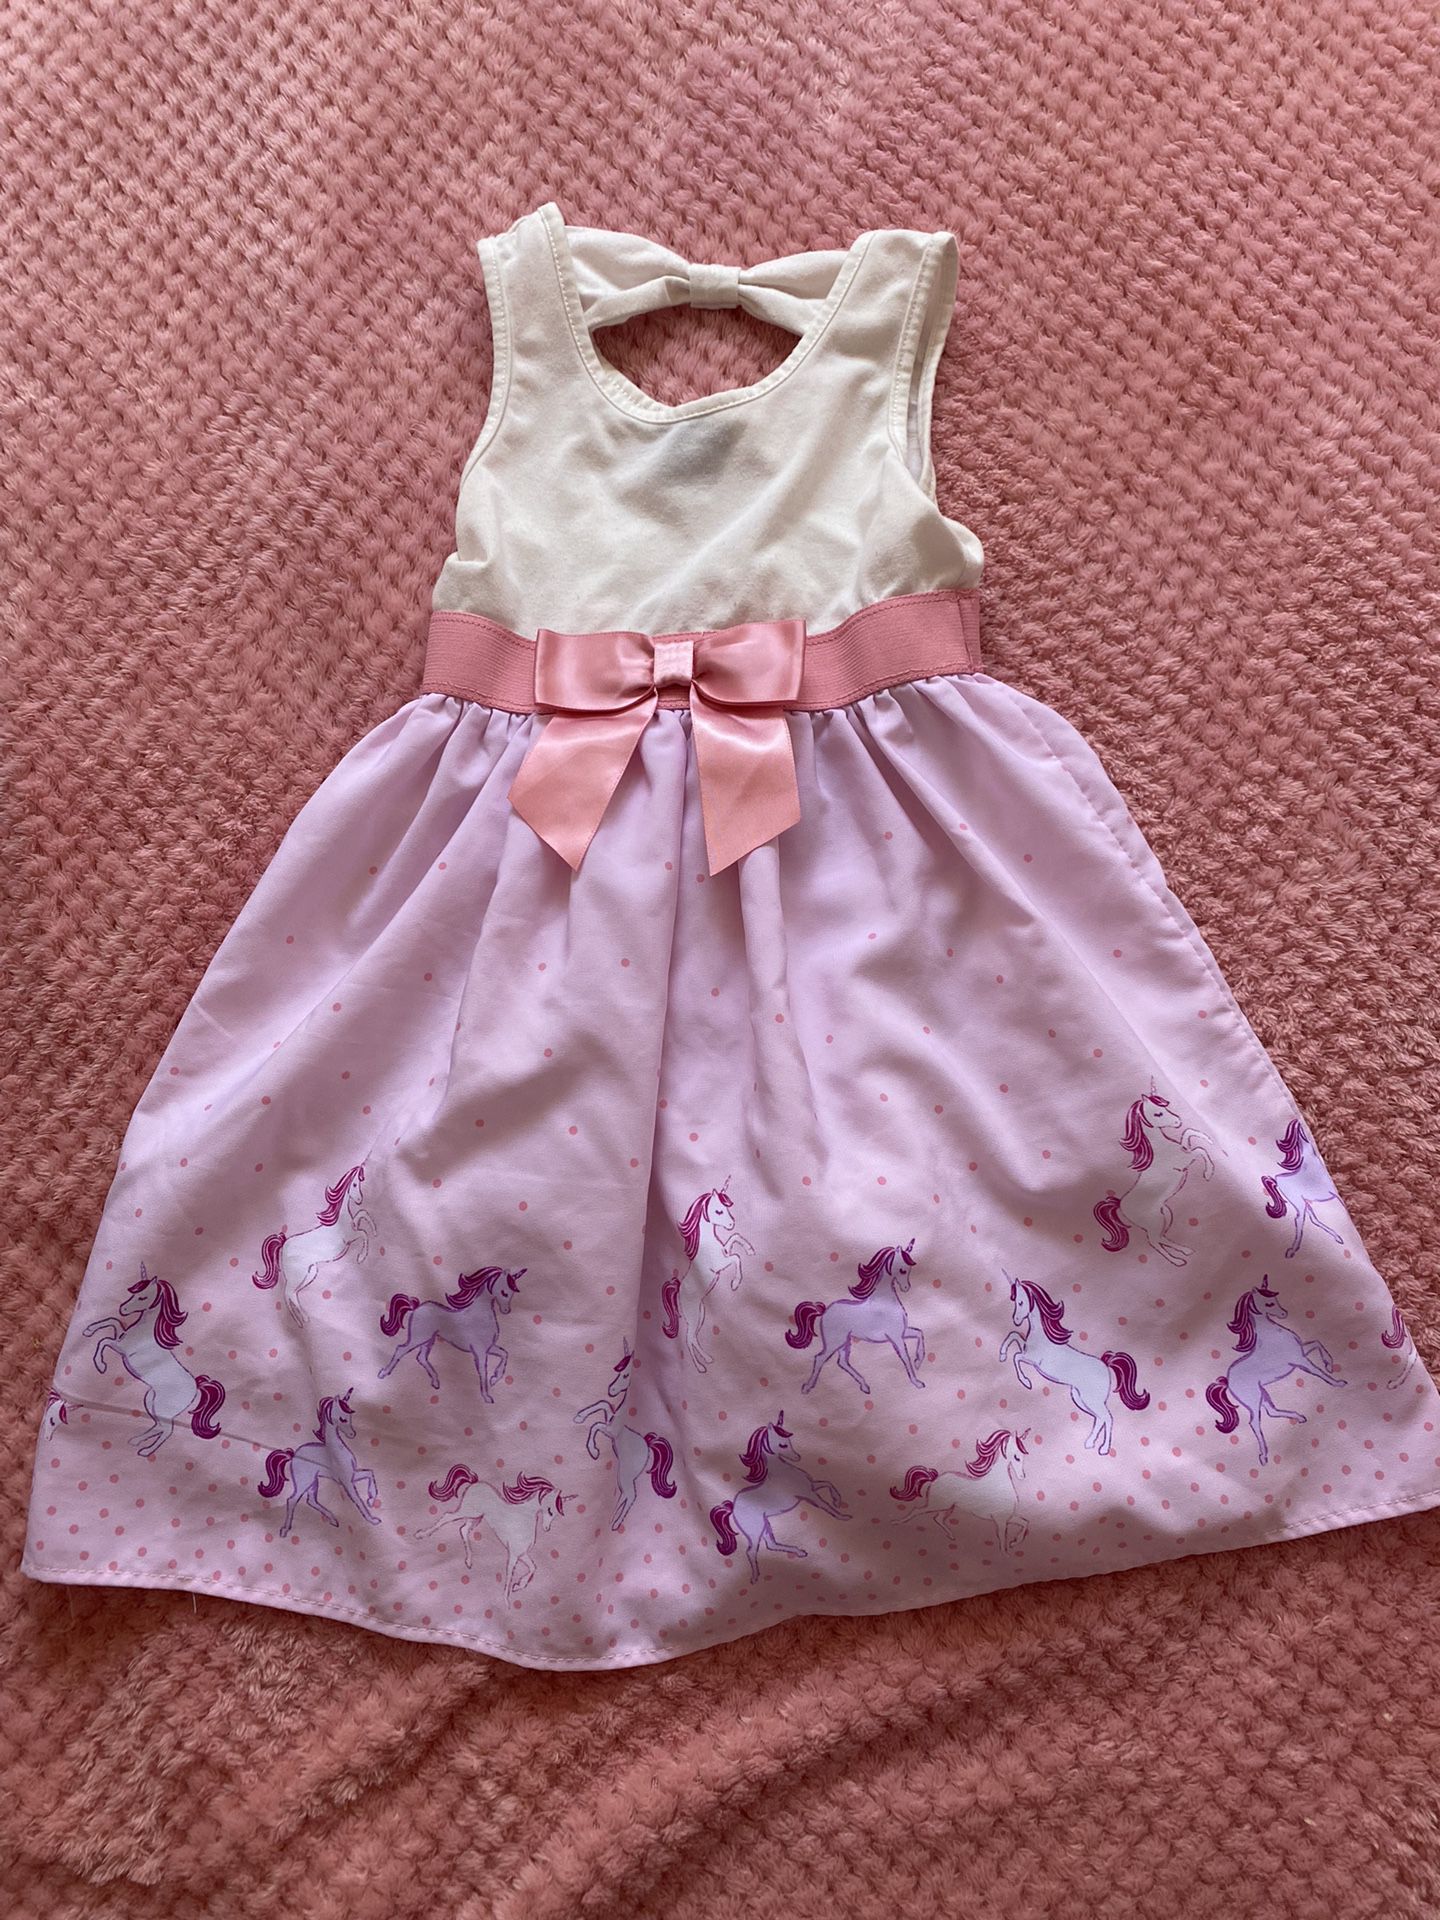 Unicorn Toddler Girl Casual Dress - Size 6 - Gently used